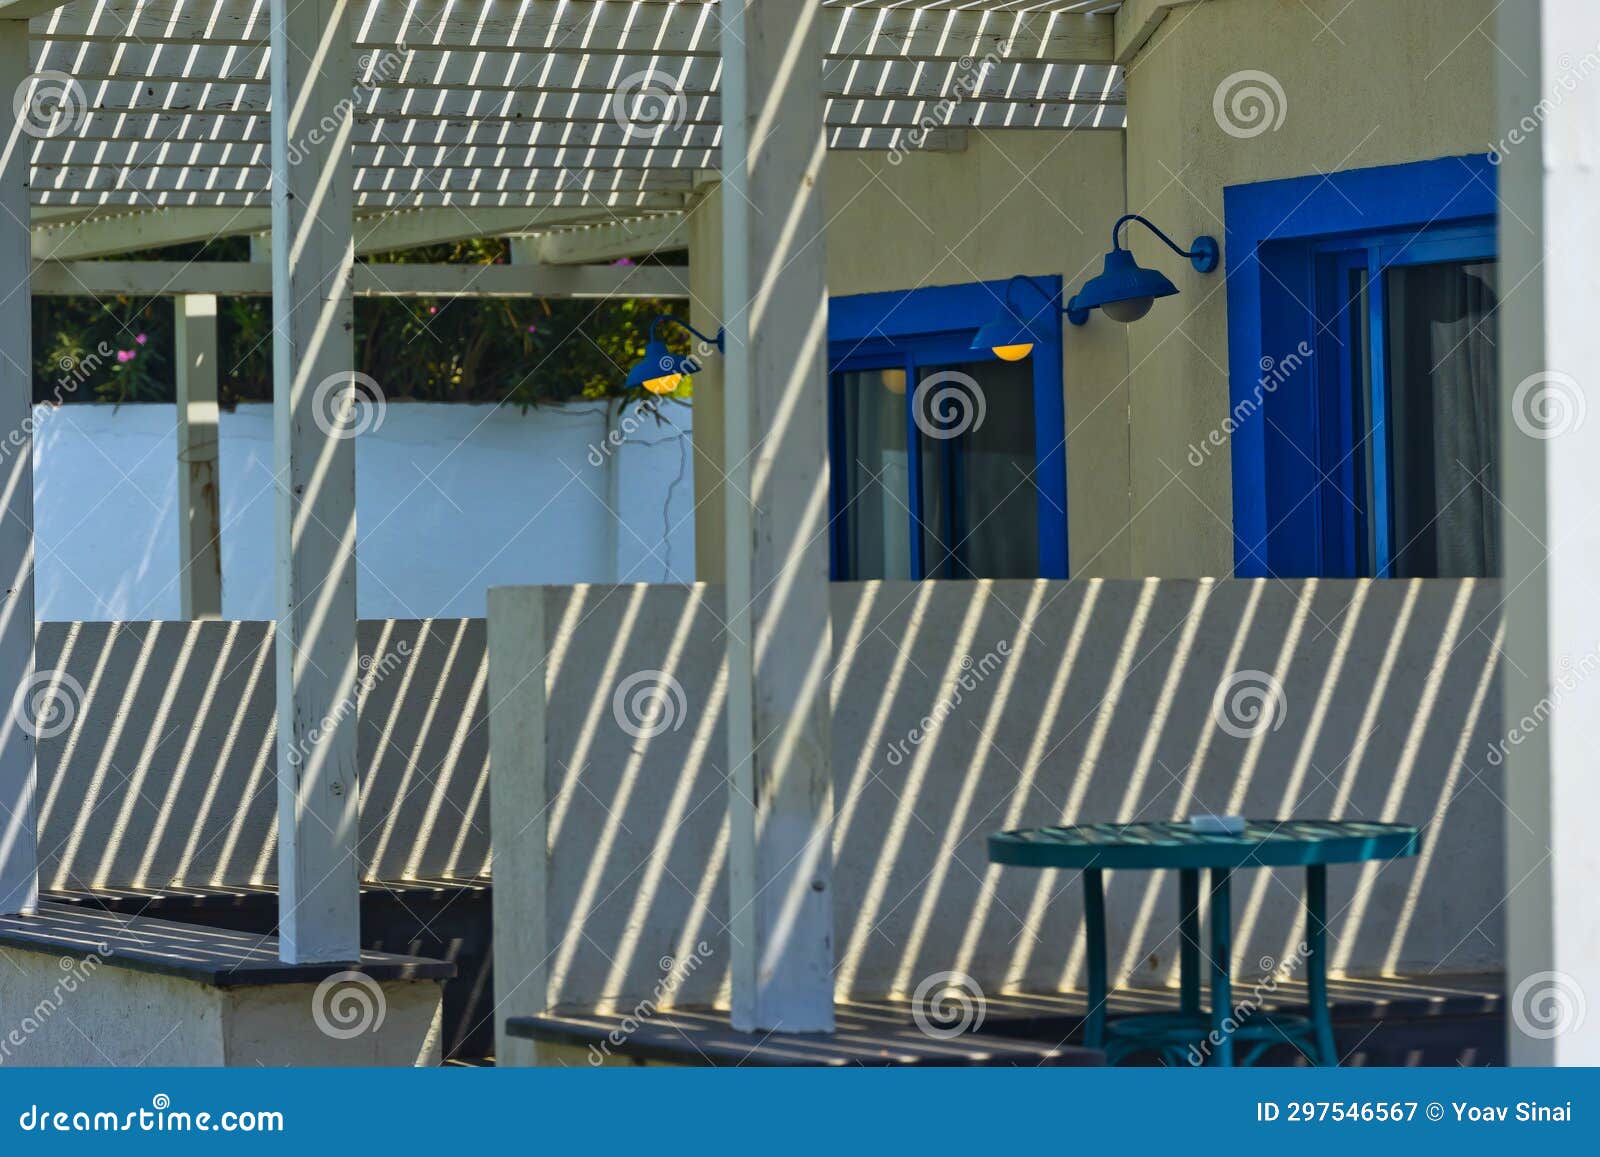 white faÃ§ades in light and shadow with blue doors nahsholim israel